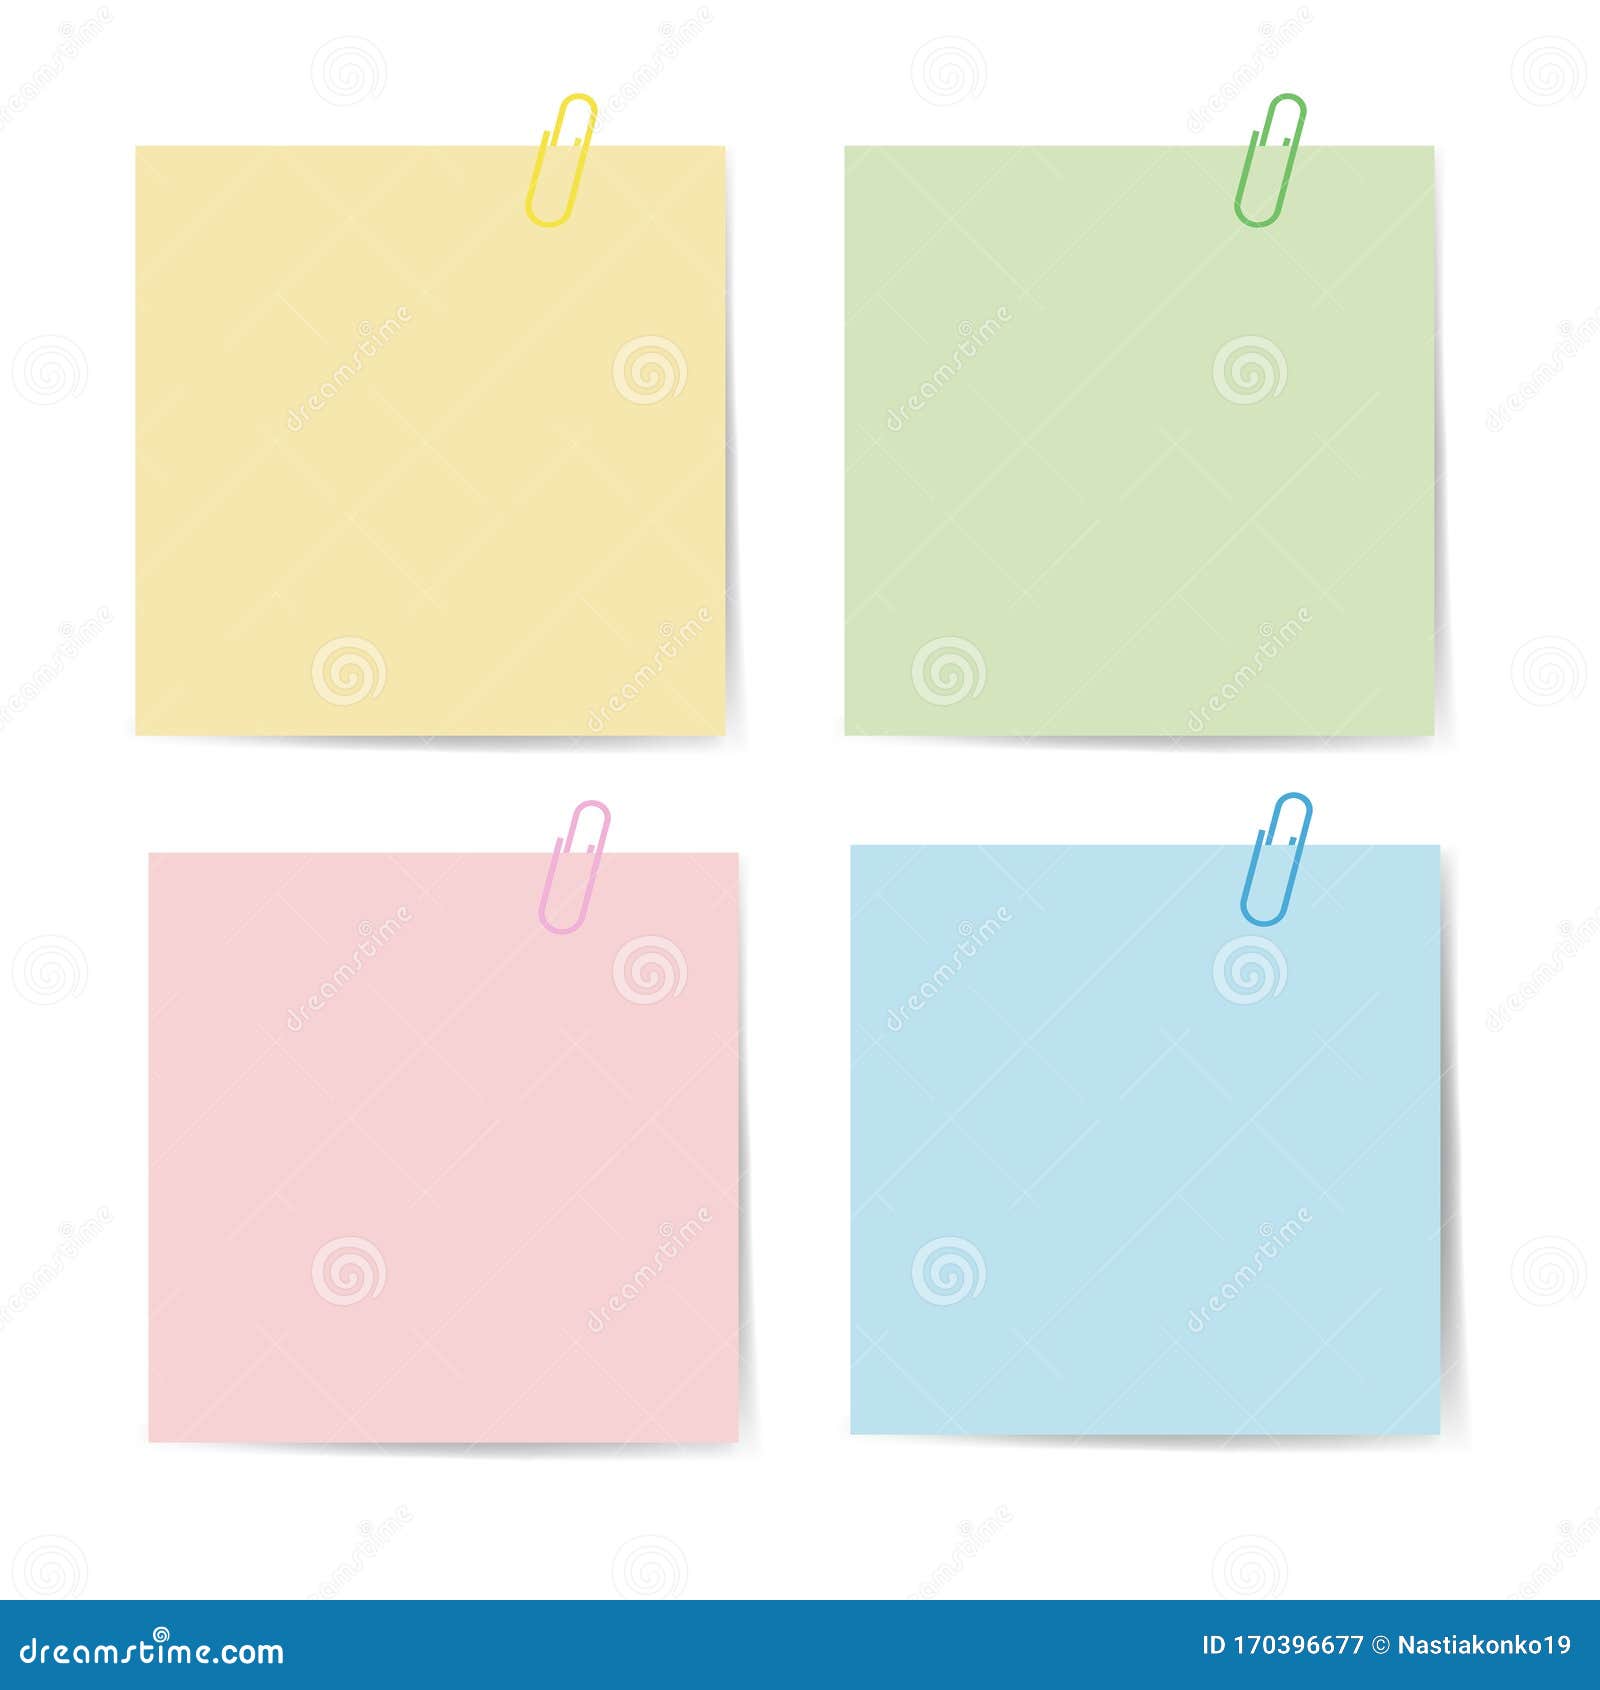 memo paper with paperclip for office paperwork. fastener, paperclip with blank notepaper. attaching binder with white